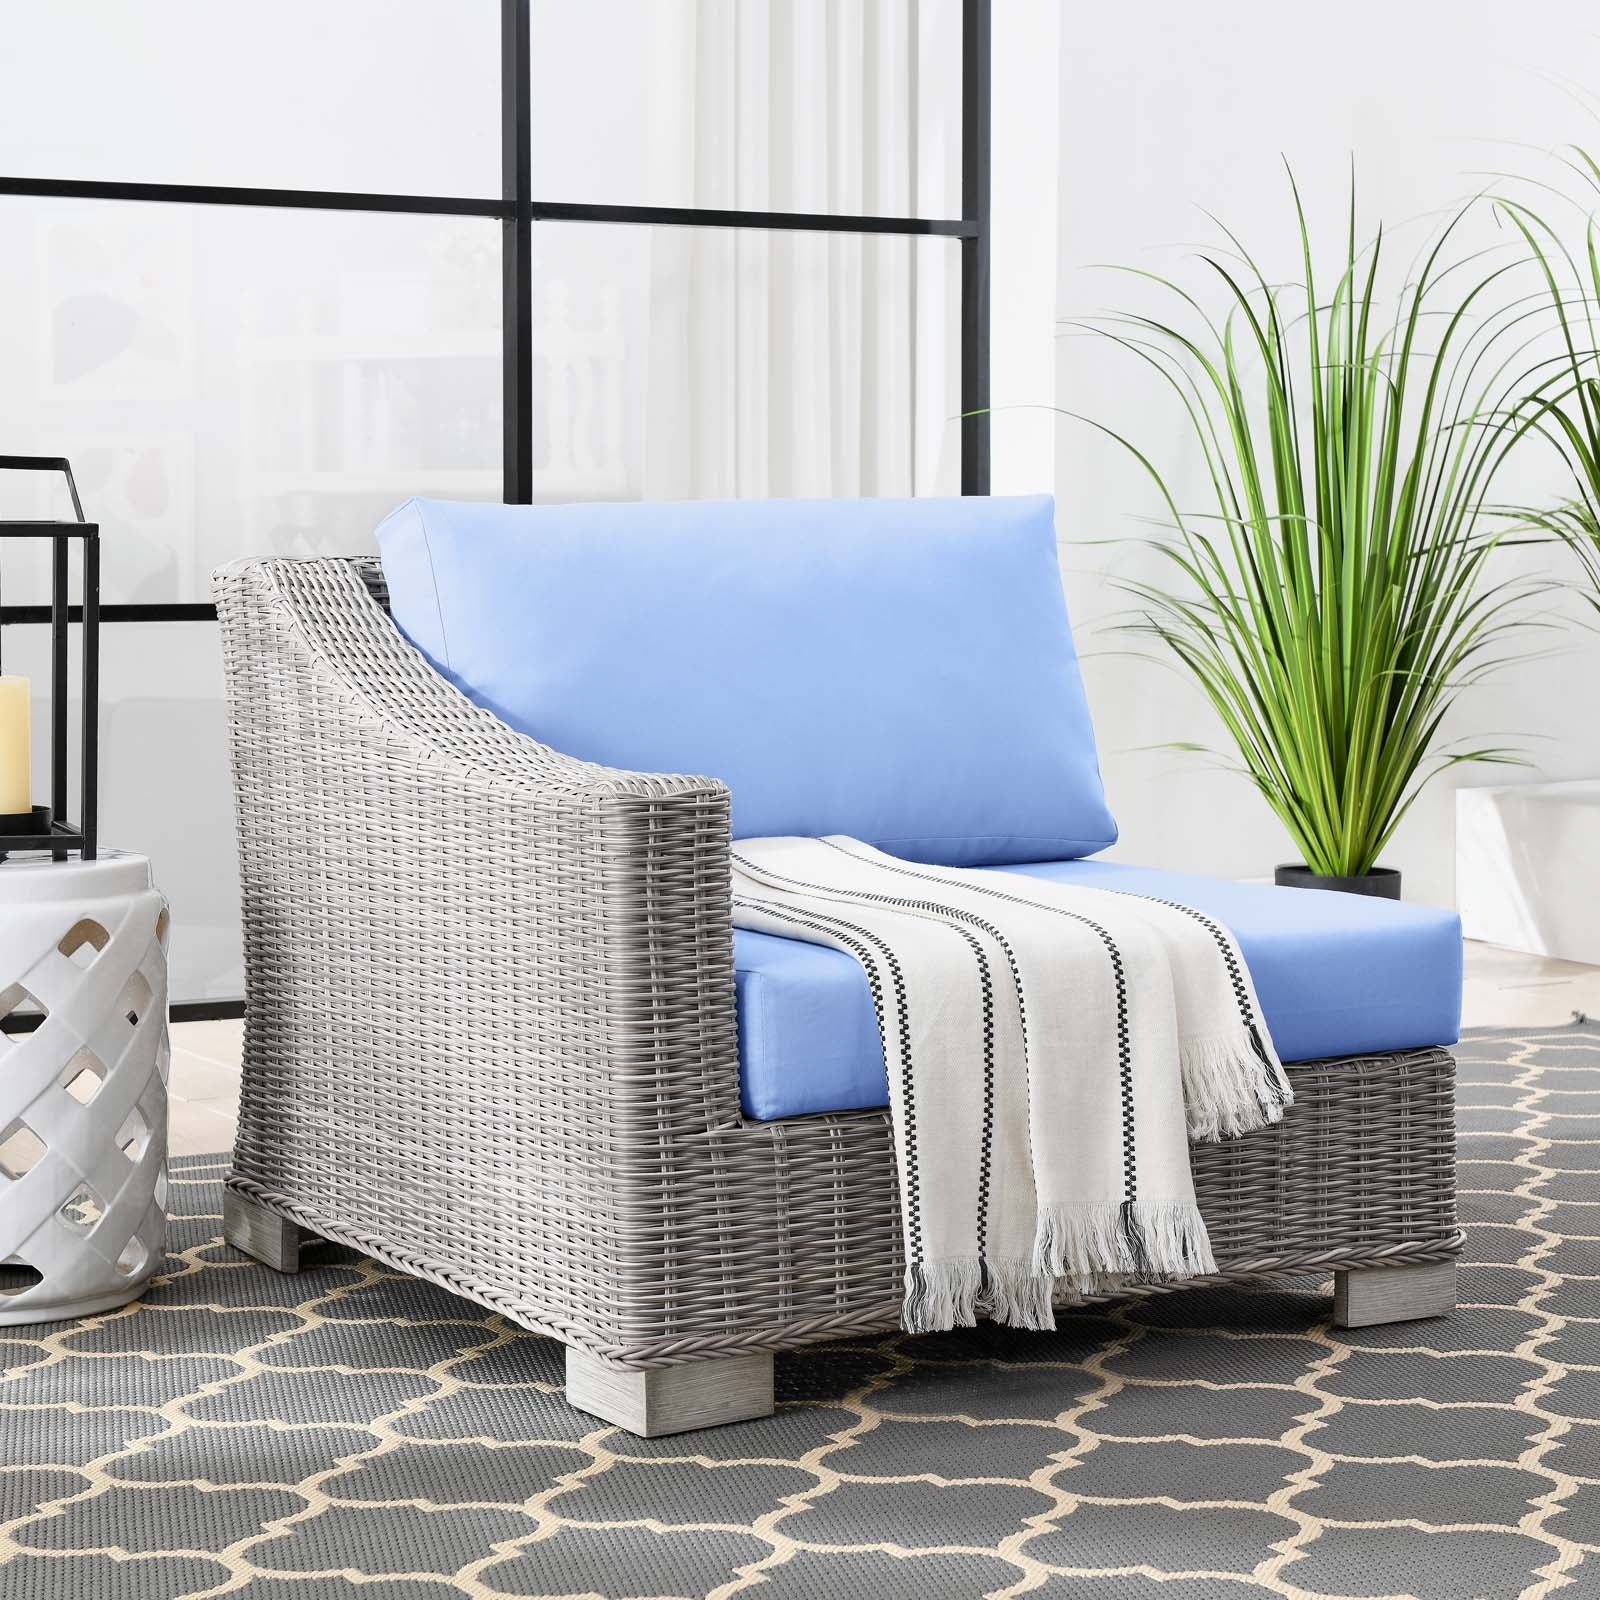 Conway Outdoor Patio Wicker Rattan Left-Arm Chair-Outdoor Chair-Modway-Wall2Wall Furnishings